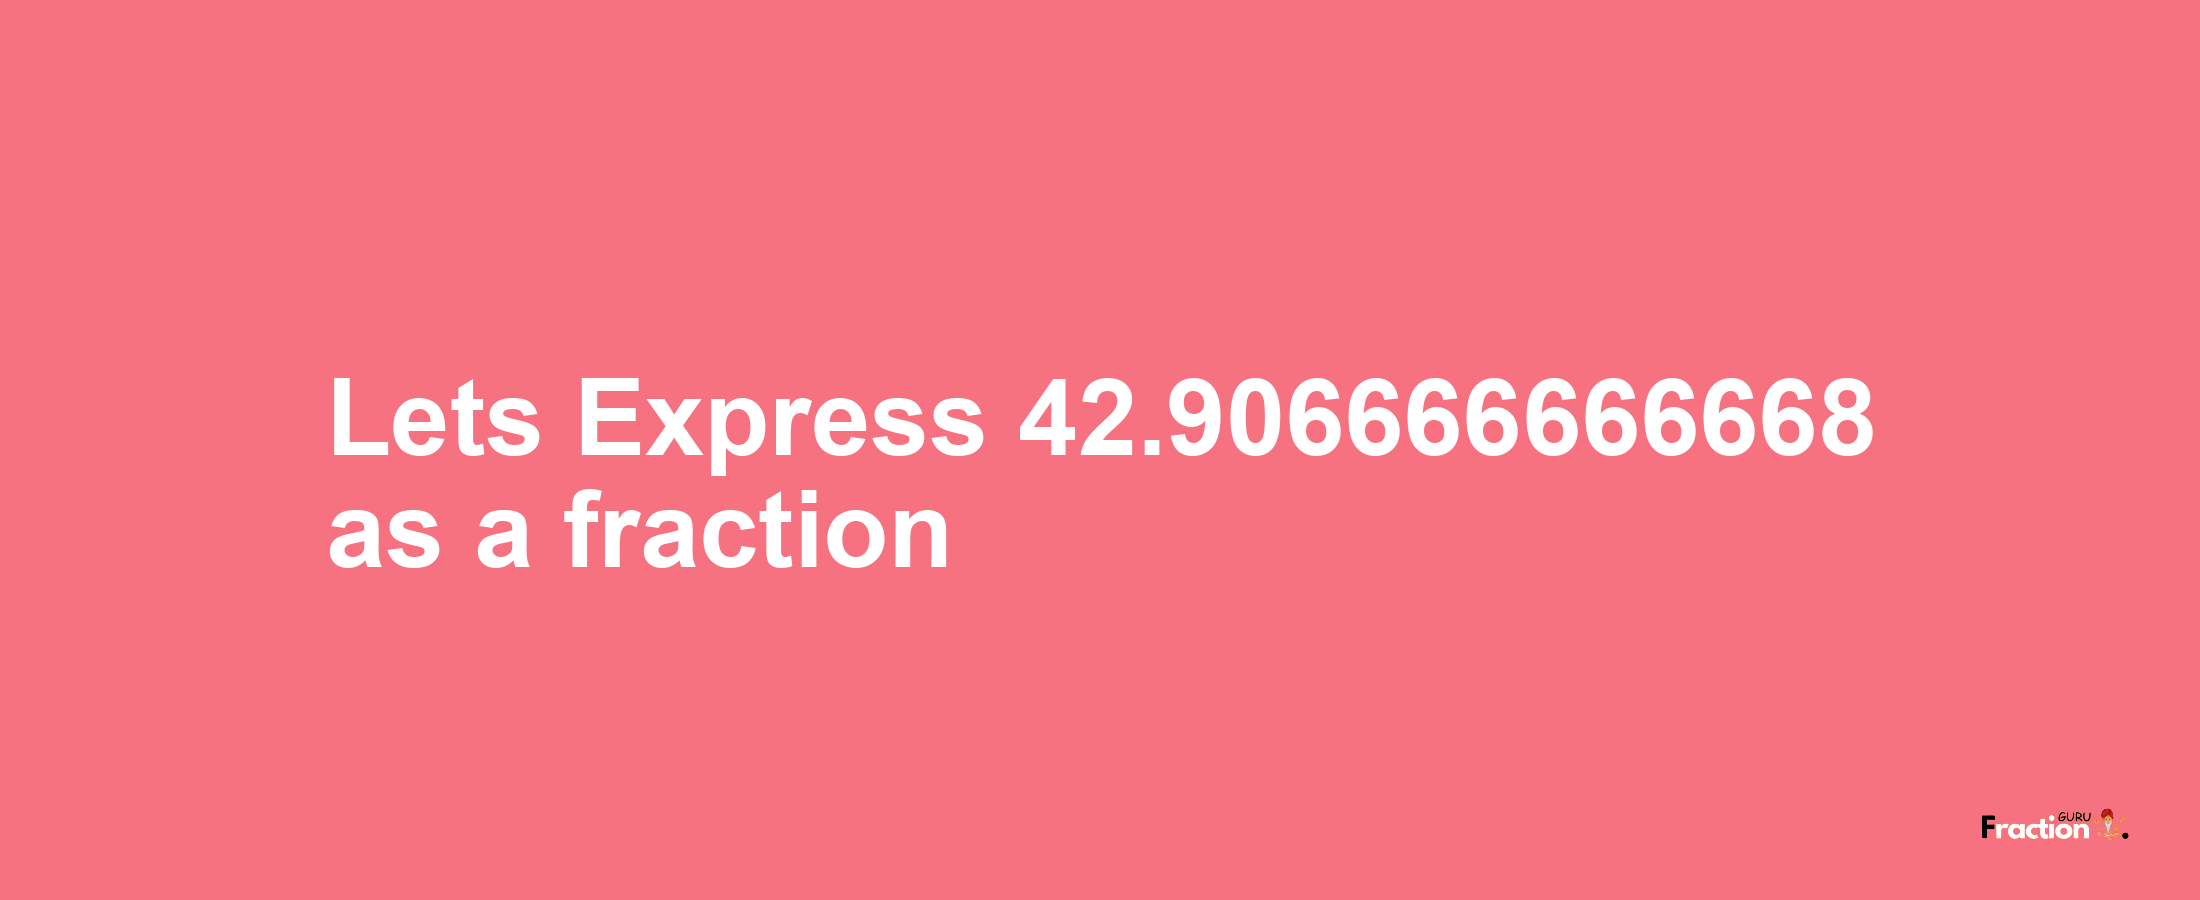 Lets Express 42.906666666668 as afraction